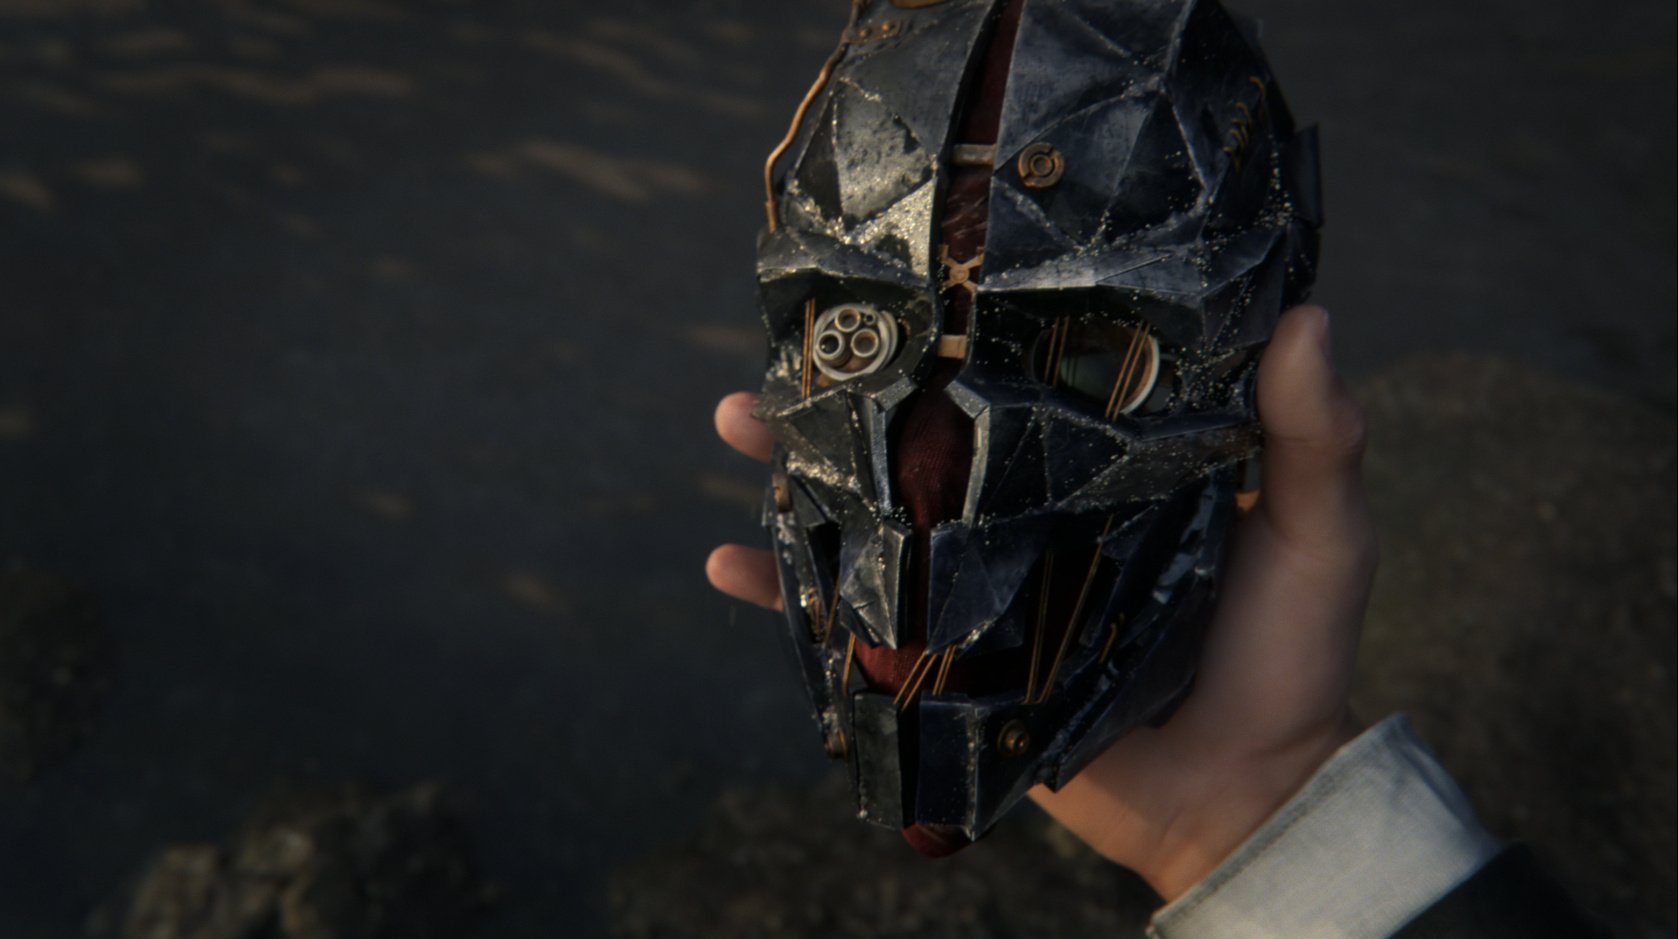 Dishonored 2 Critic Reviews - What Did Gaming Critics Say?